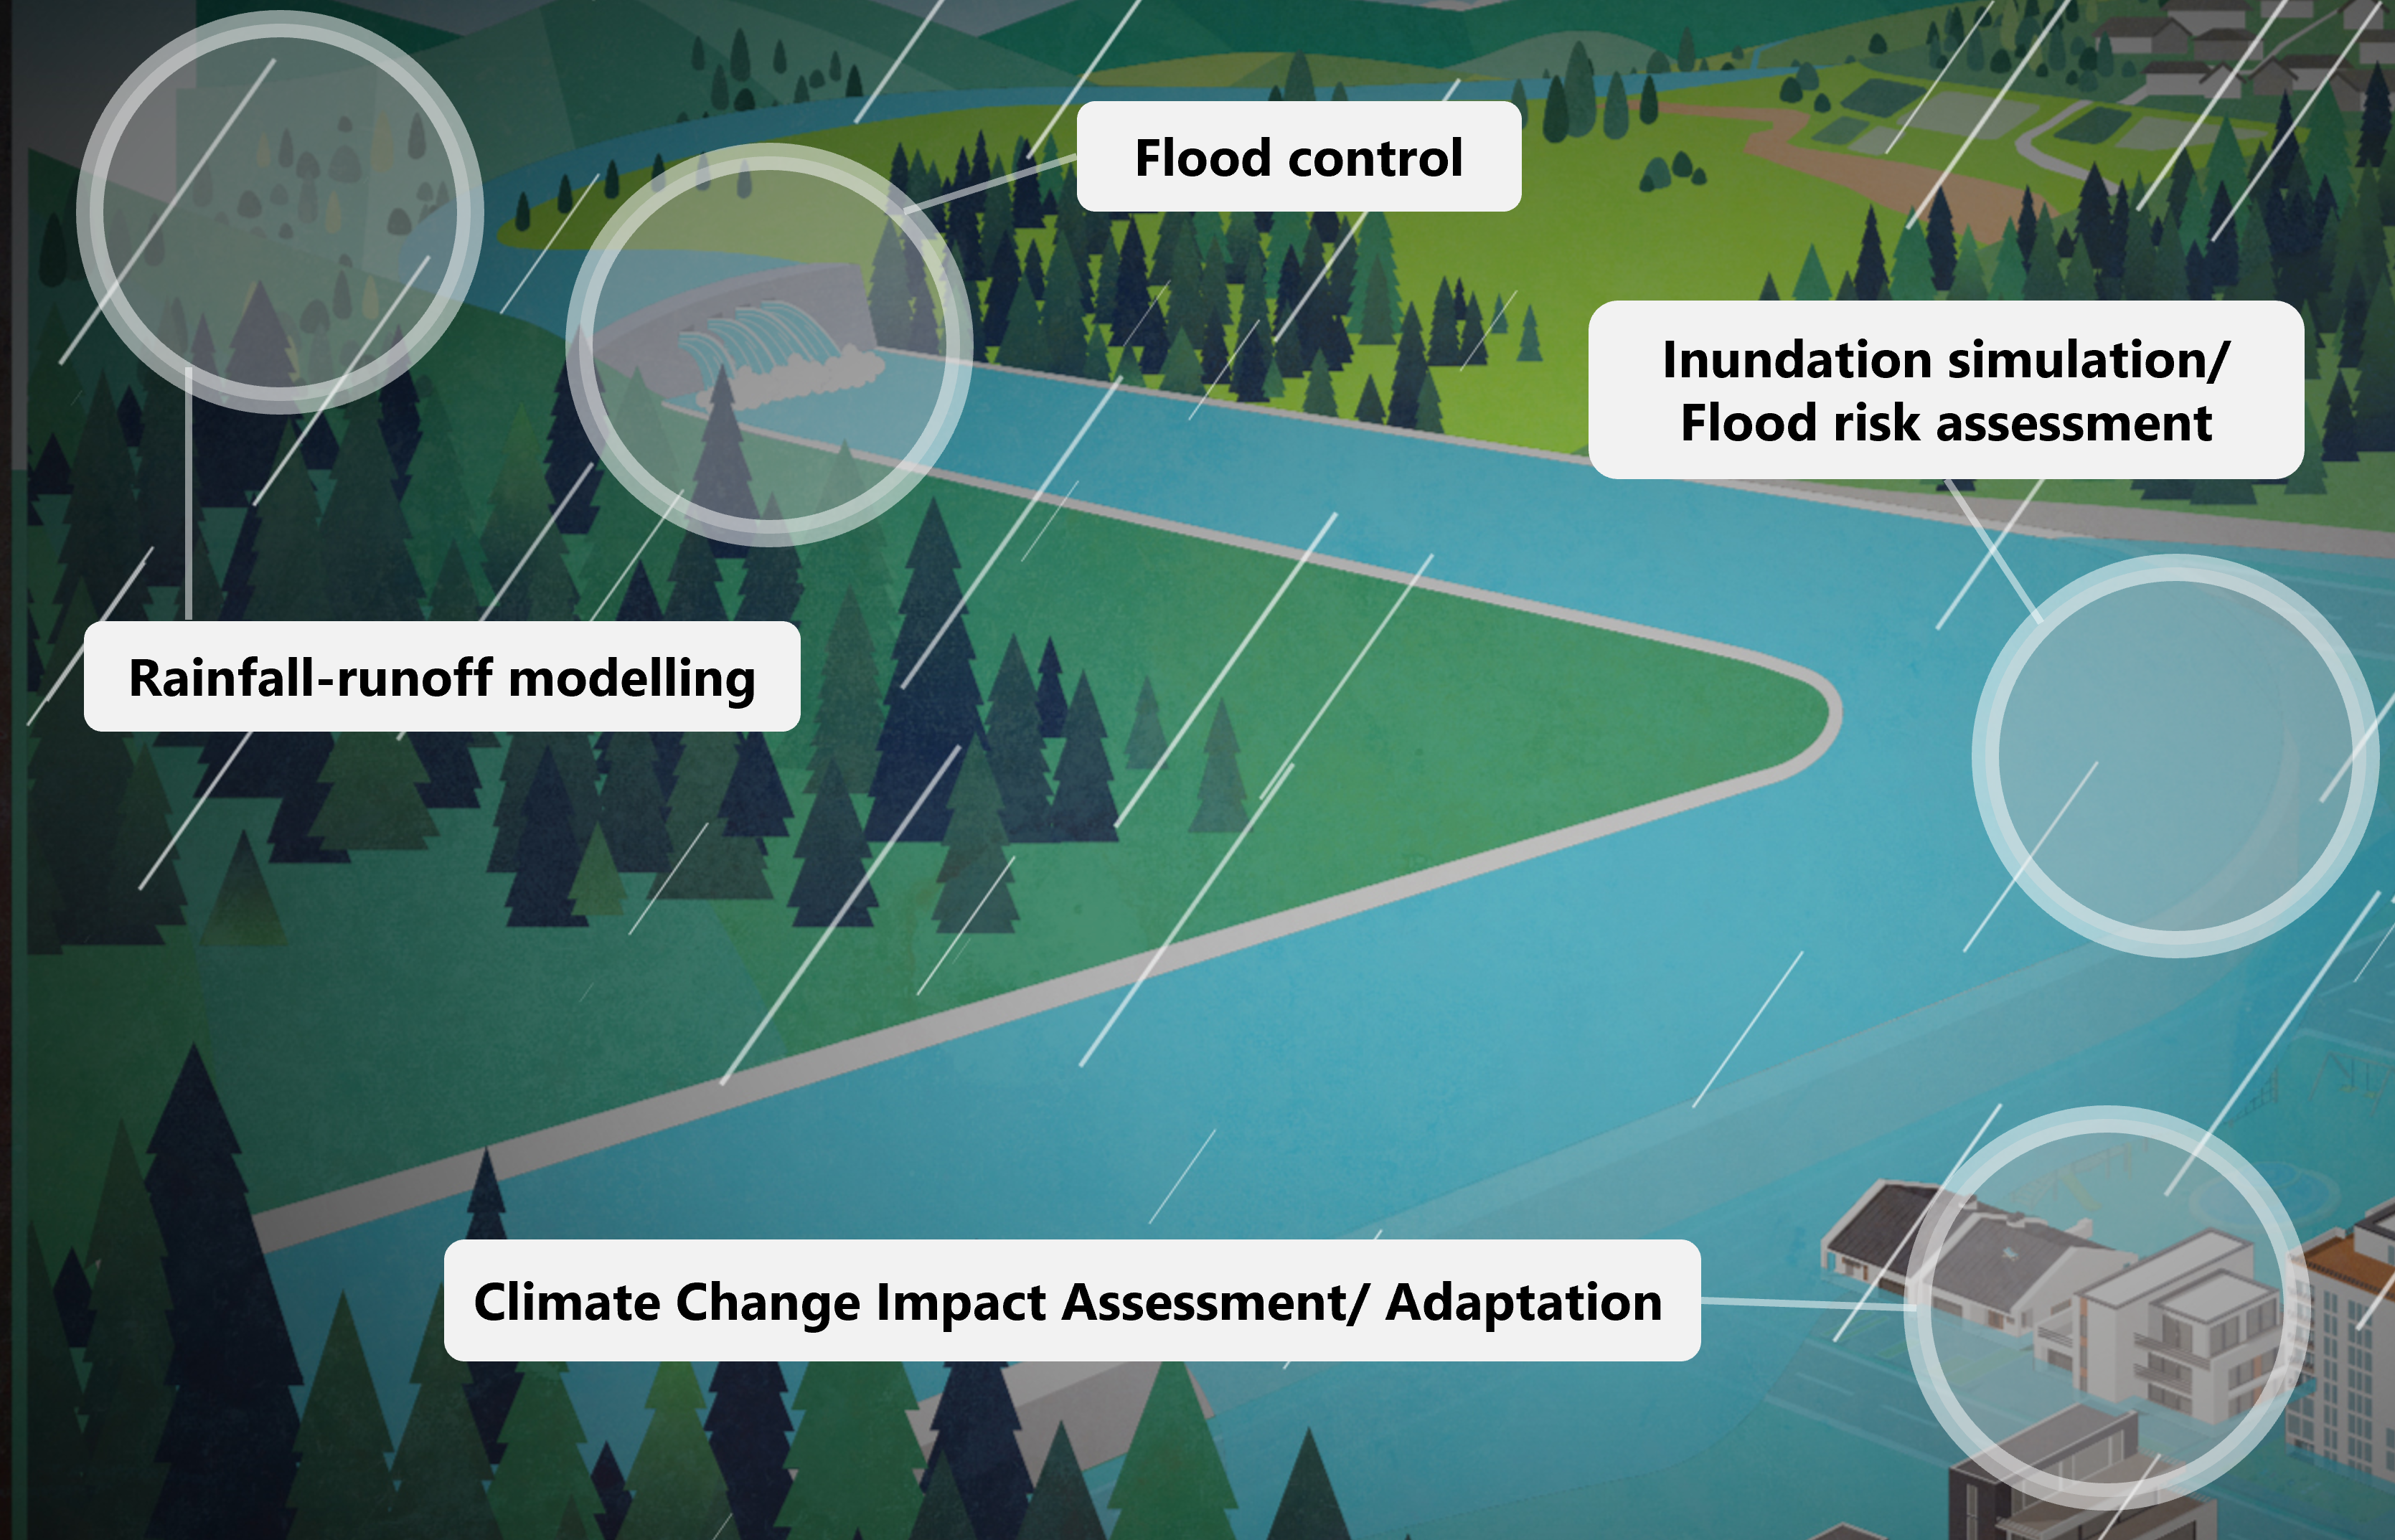 Flood contorl, Rainfall-runoff modelling, Flood control, Inundation simmulation and flood risk assessment, Climate Change Impact  Assessment / Adaptation